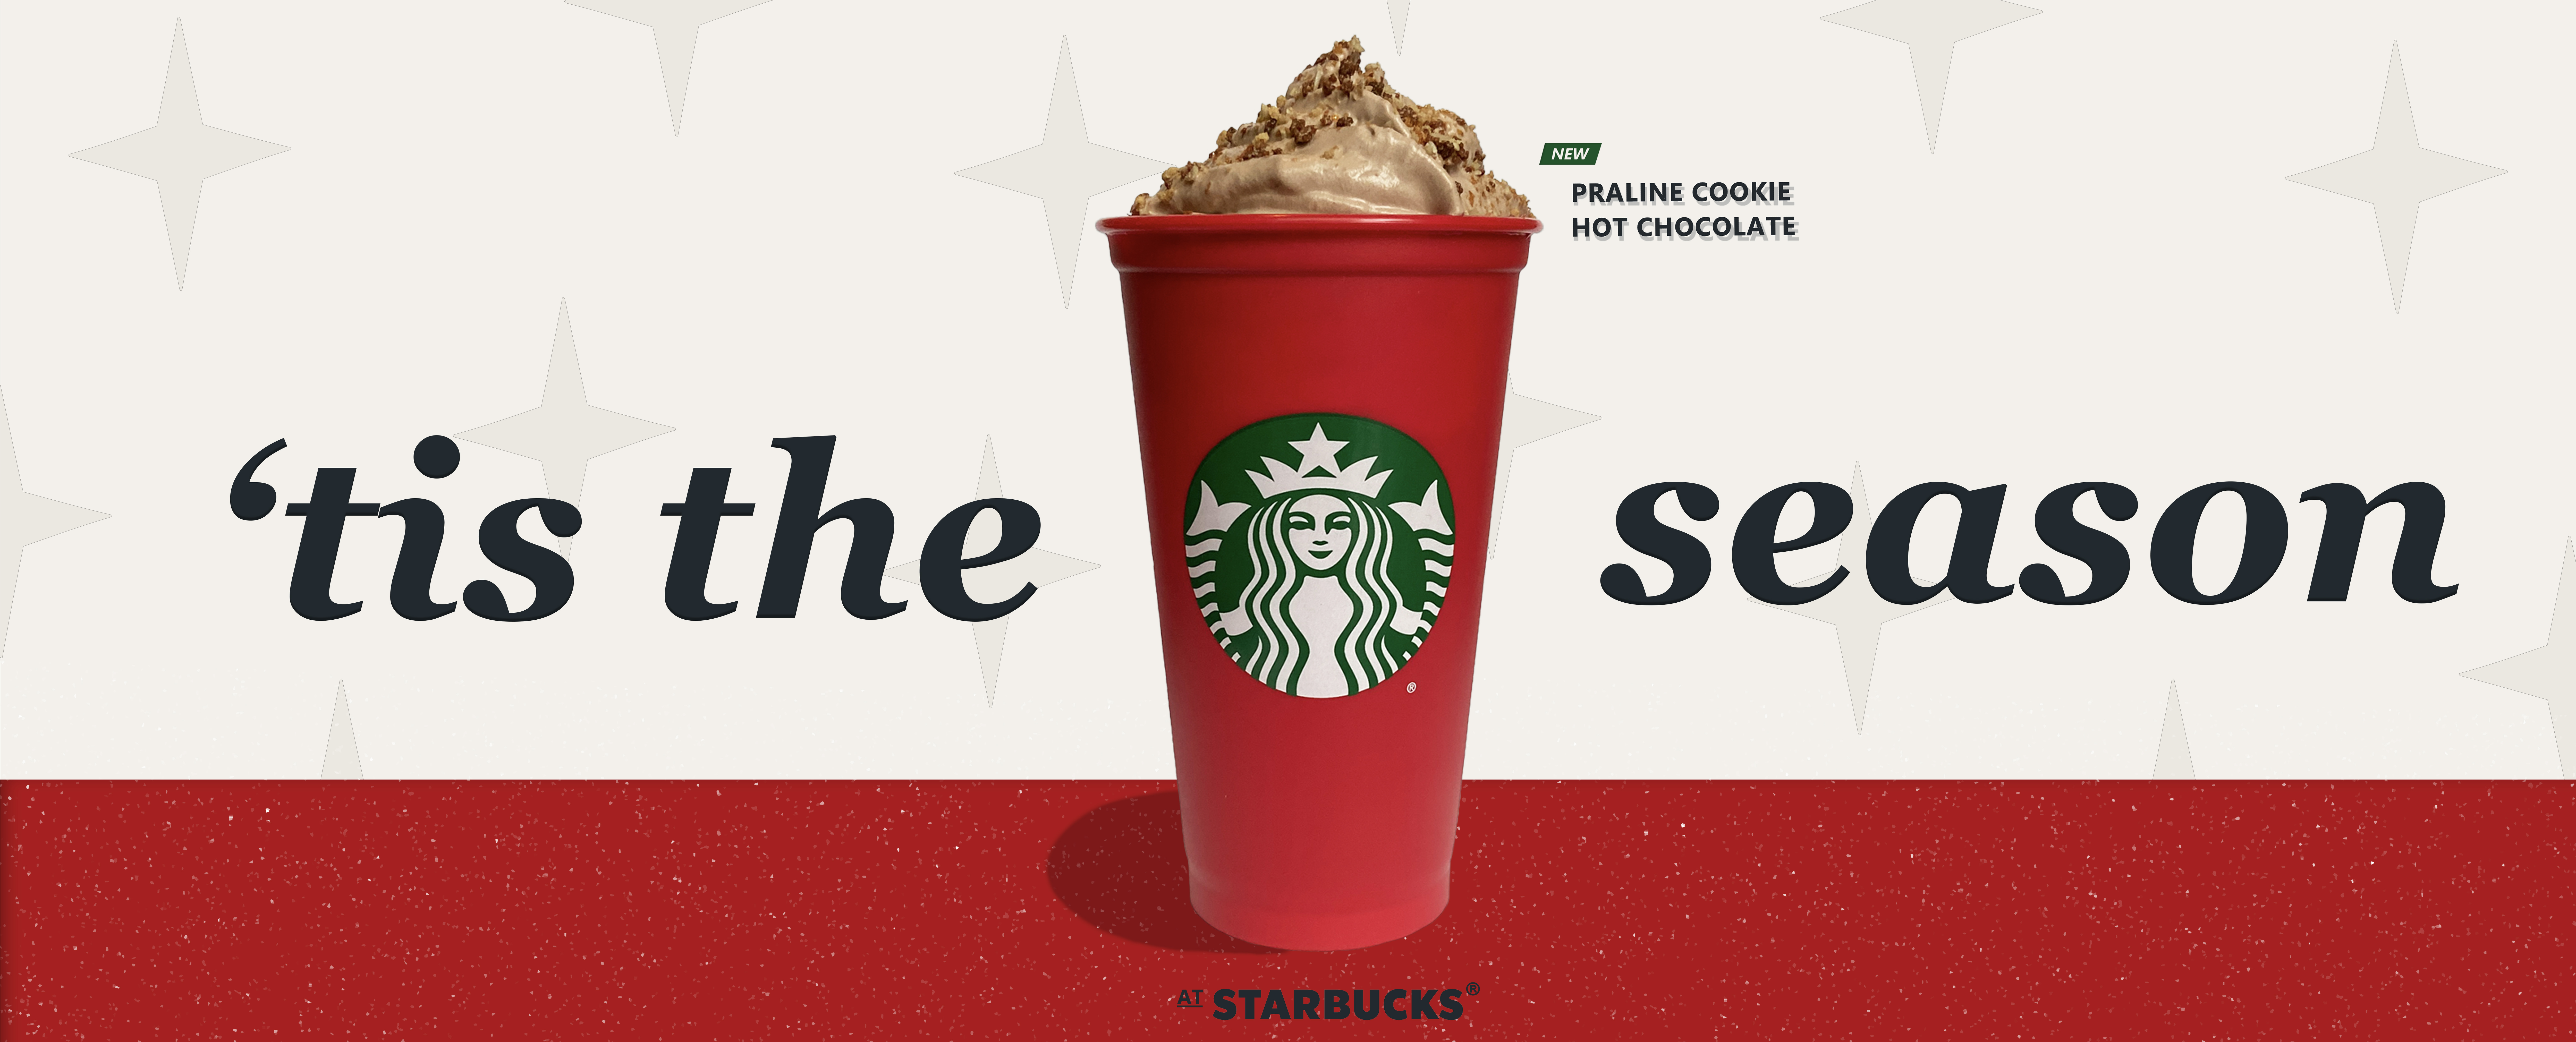 Ad Design for Starbucks created for a university